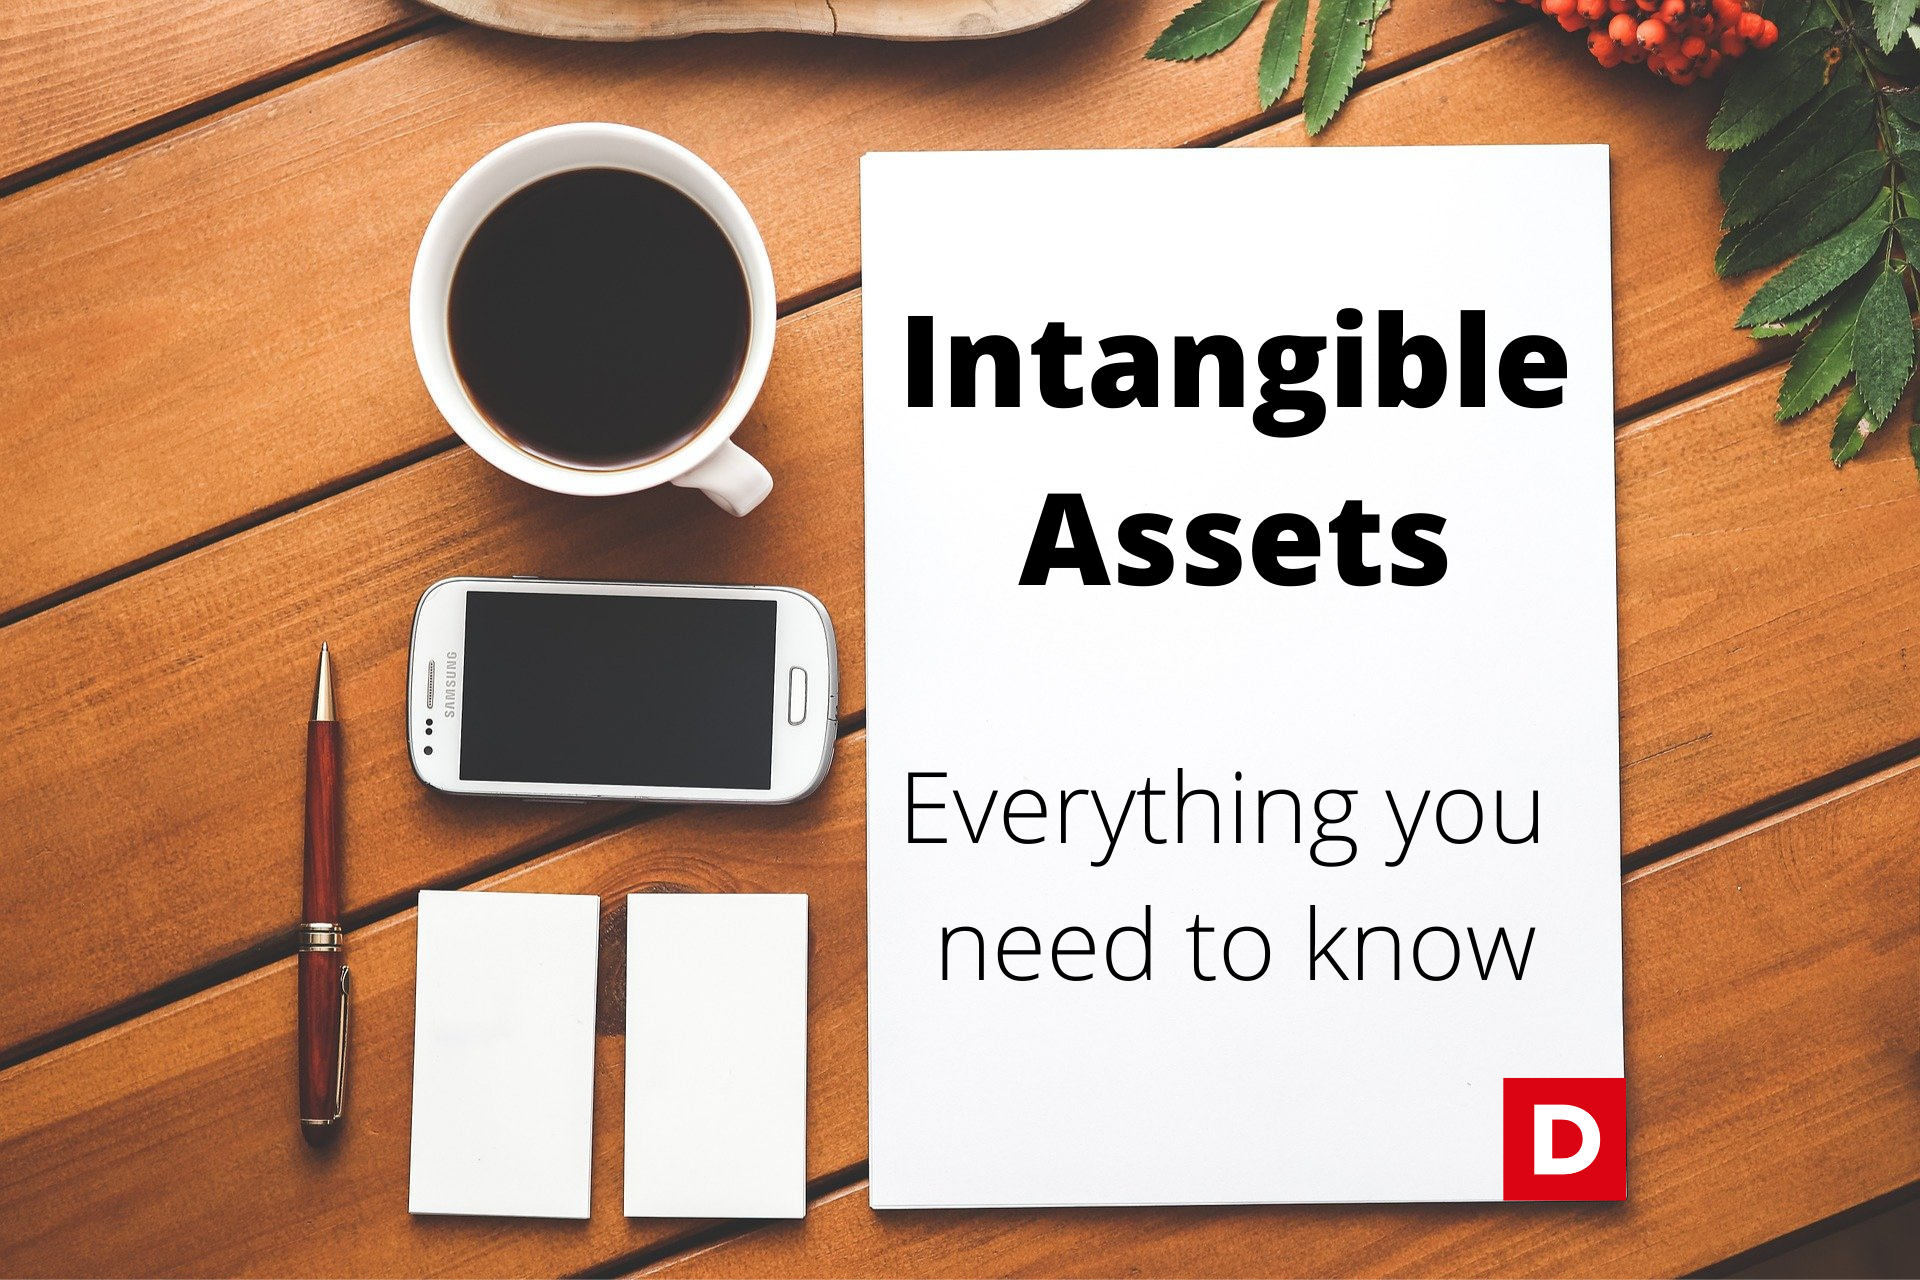 Understanding Intangible Assets - Non-Physical Assets with Considerable Value